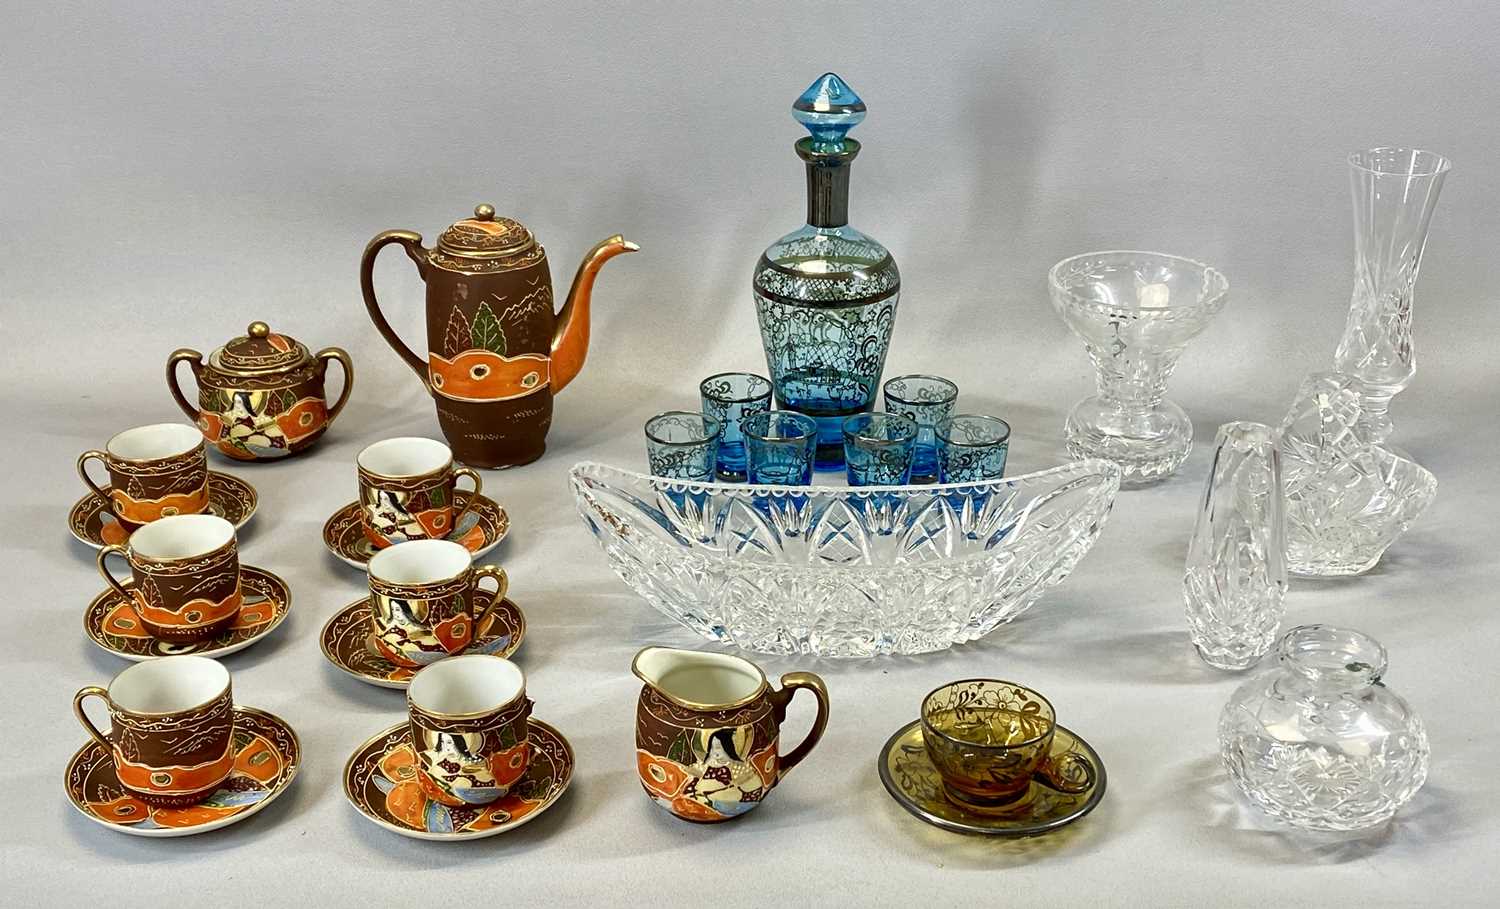 MIXED CERAMICS & GLASSWARE, including Japanese eggshell tea service, 15 pieces, a silvered blue